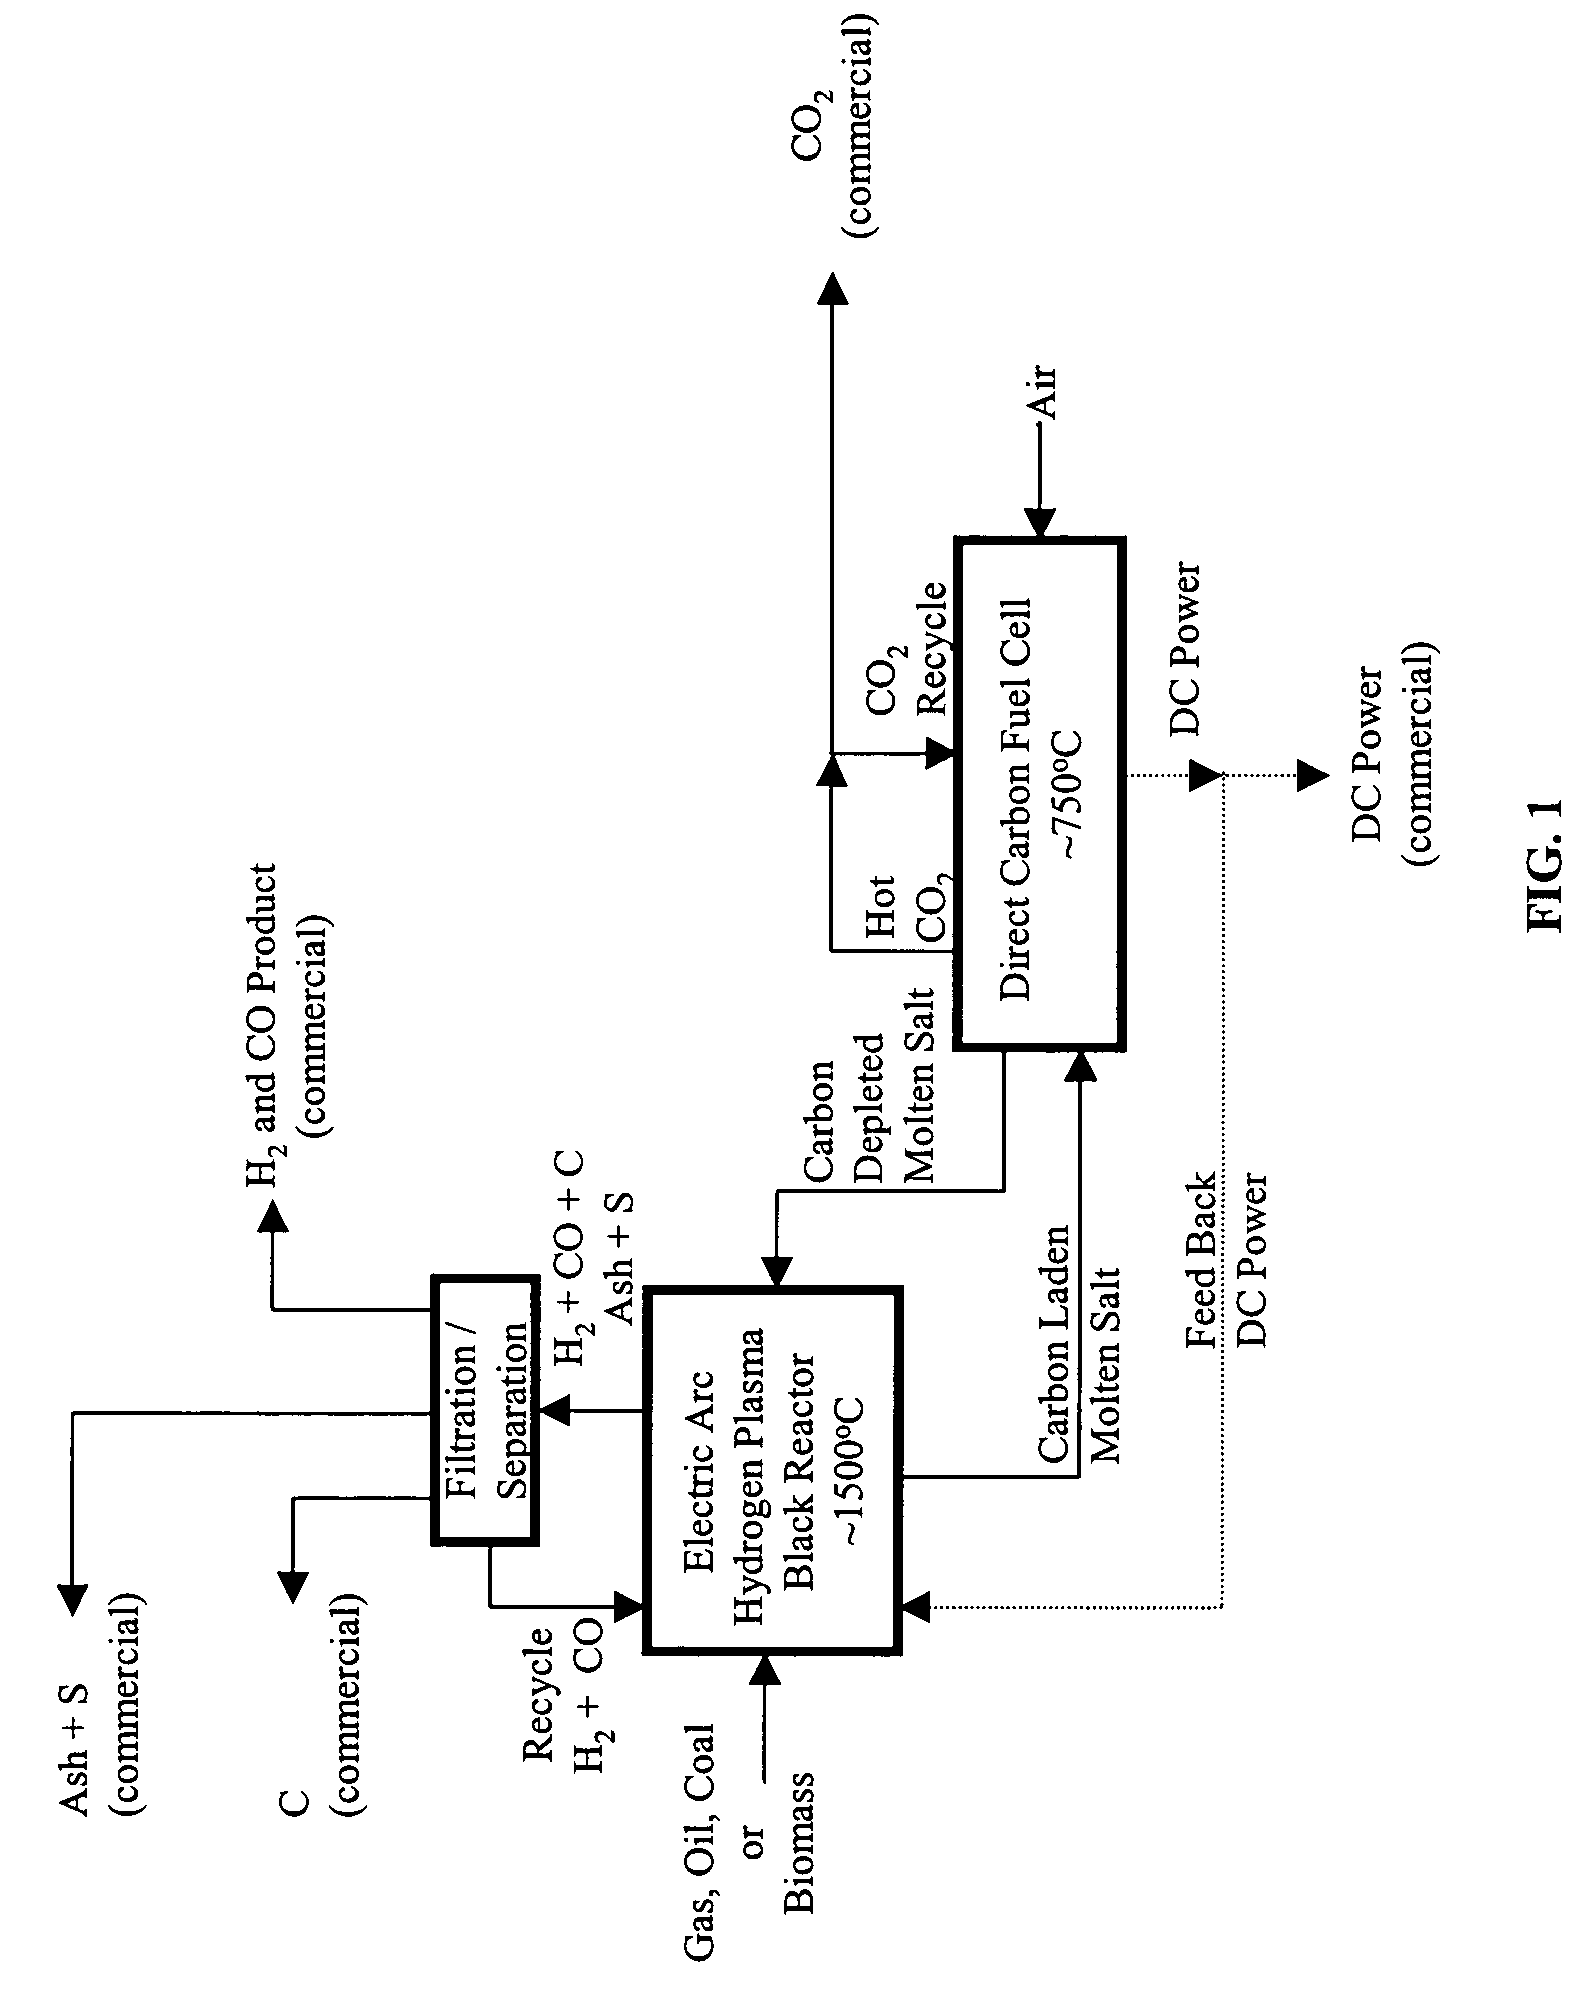 Integrated plasma fuel cell process